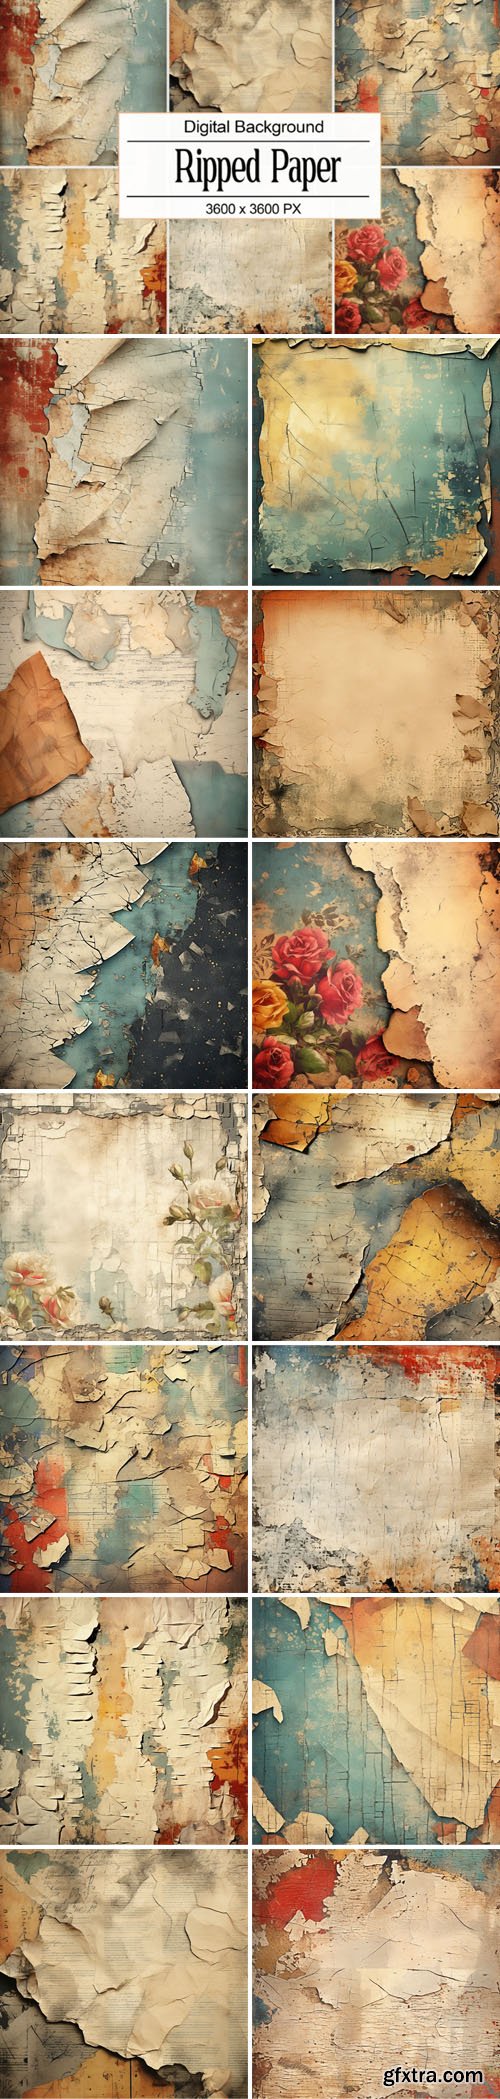 Ripped Vintage Textures Collection